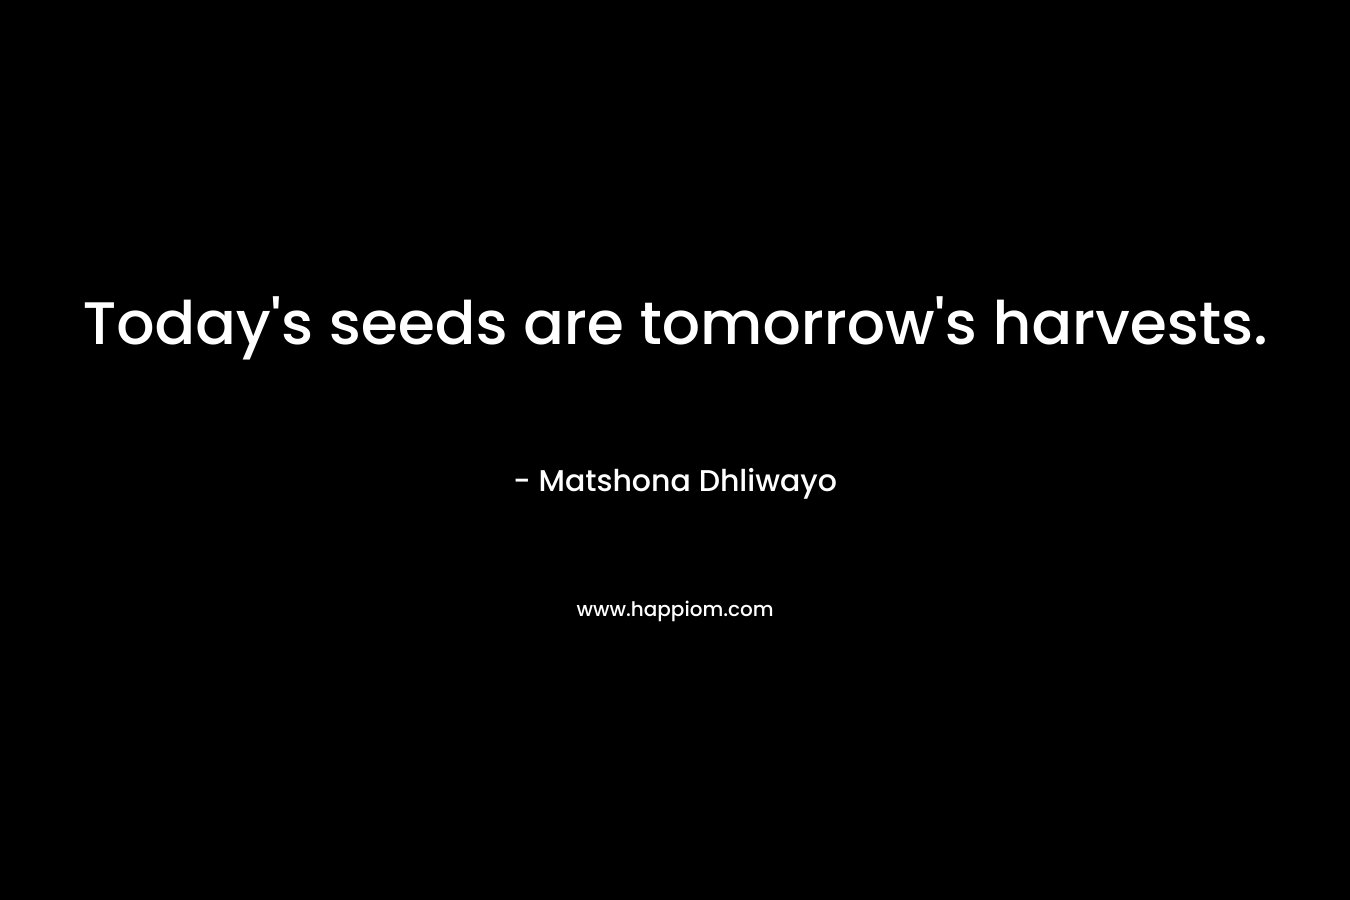 Today's seeds are tomorrow's harvests.